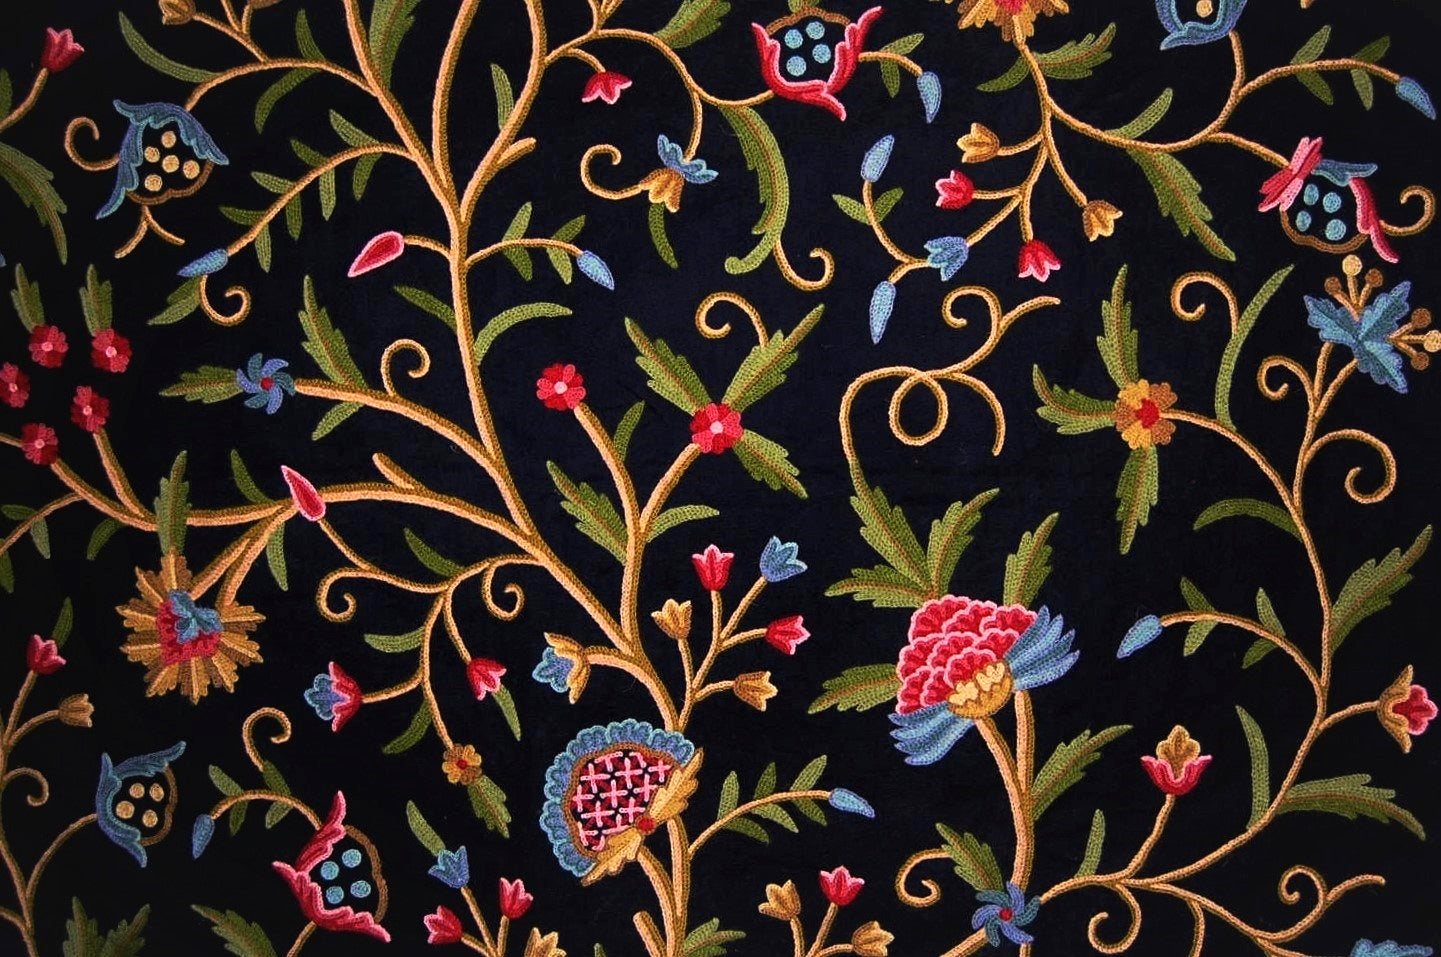 Cotton Crewel Embroidered Fabric Tree of Life Black, Multicolor #DDR202